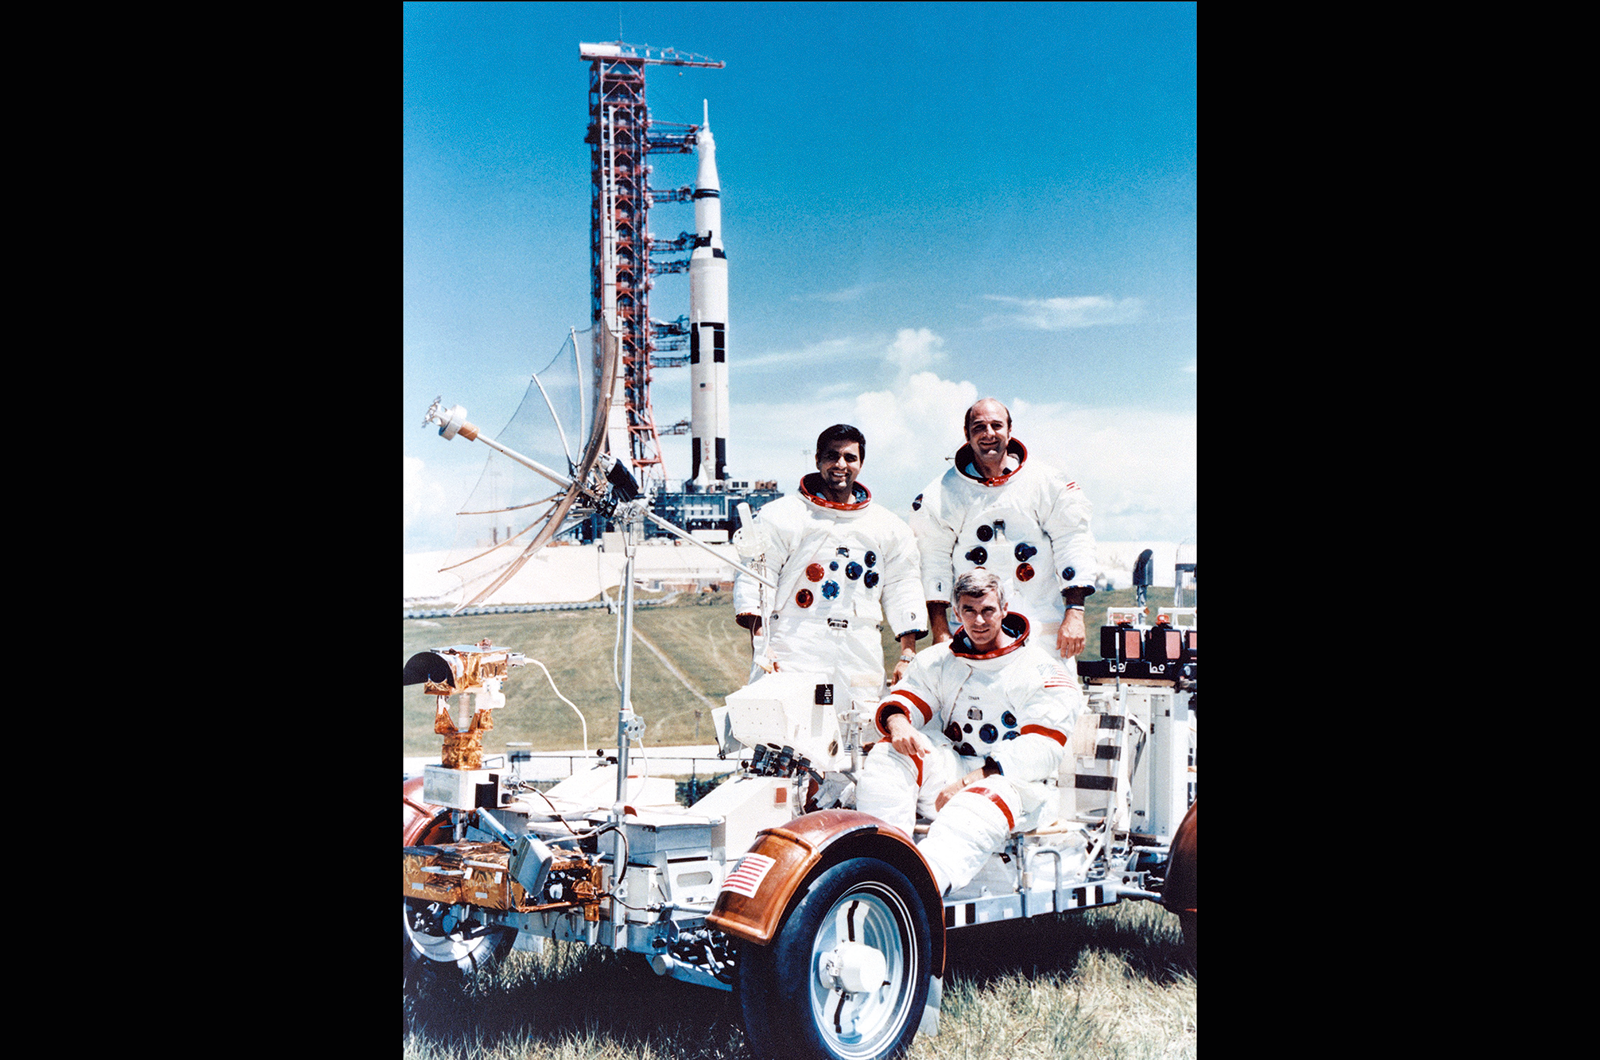 Classic & Sports Car – Lunar rover: the story of the most expensive car ever